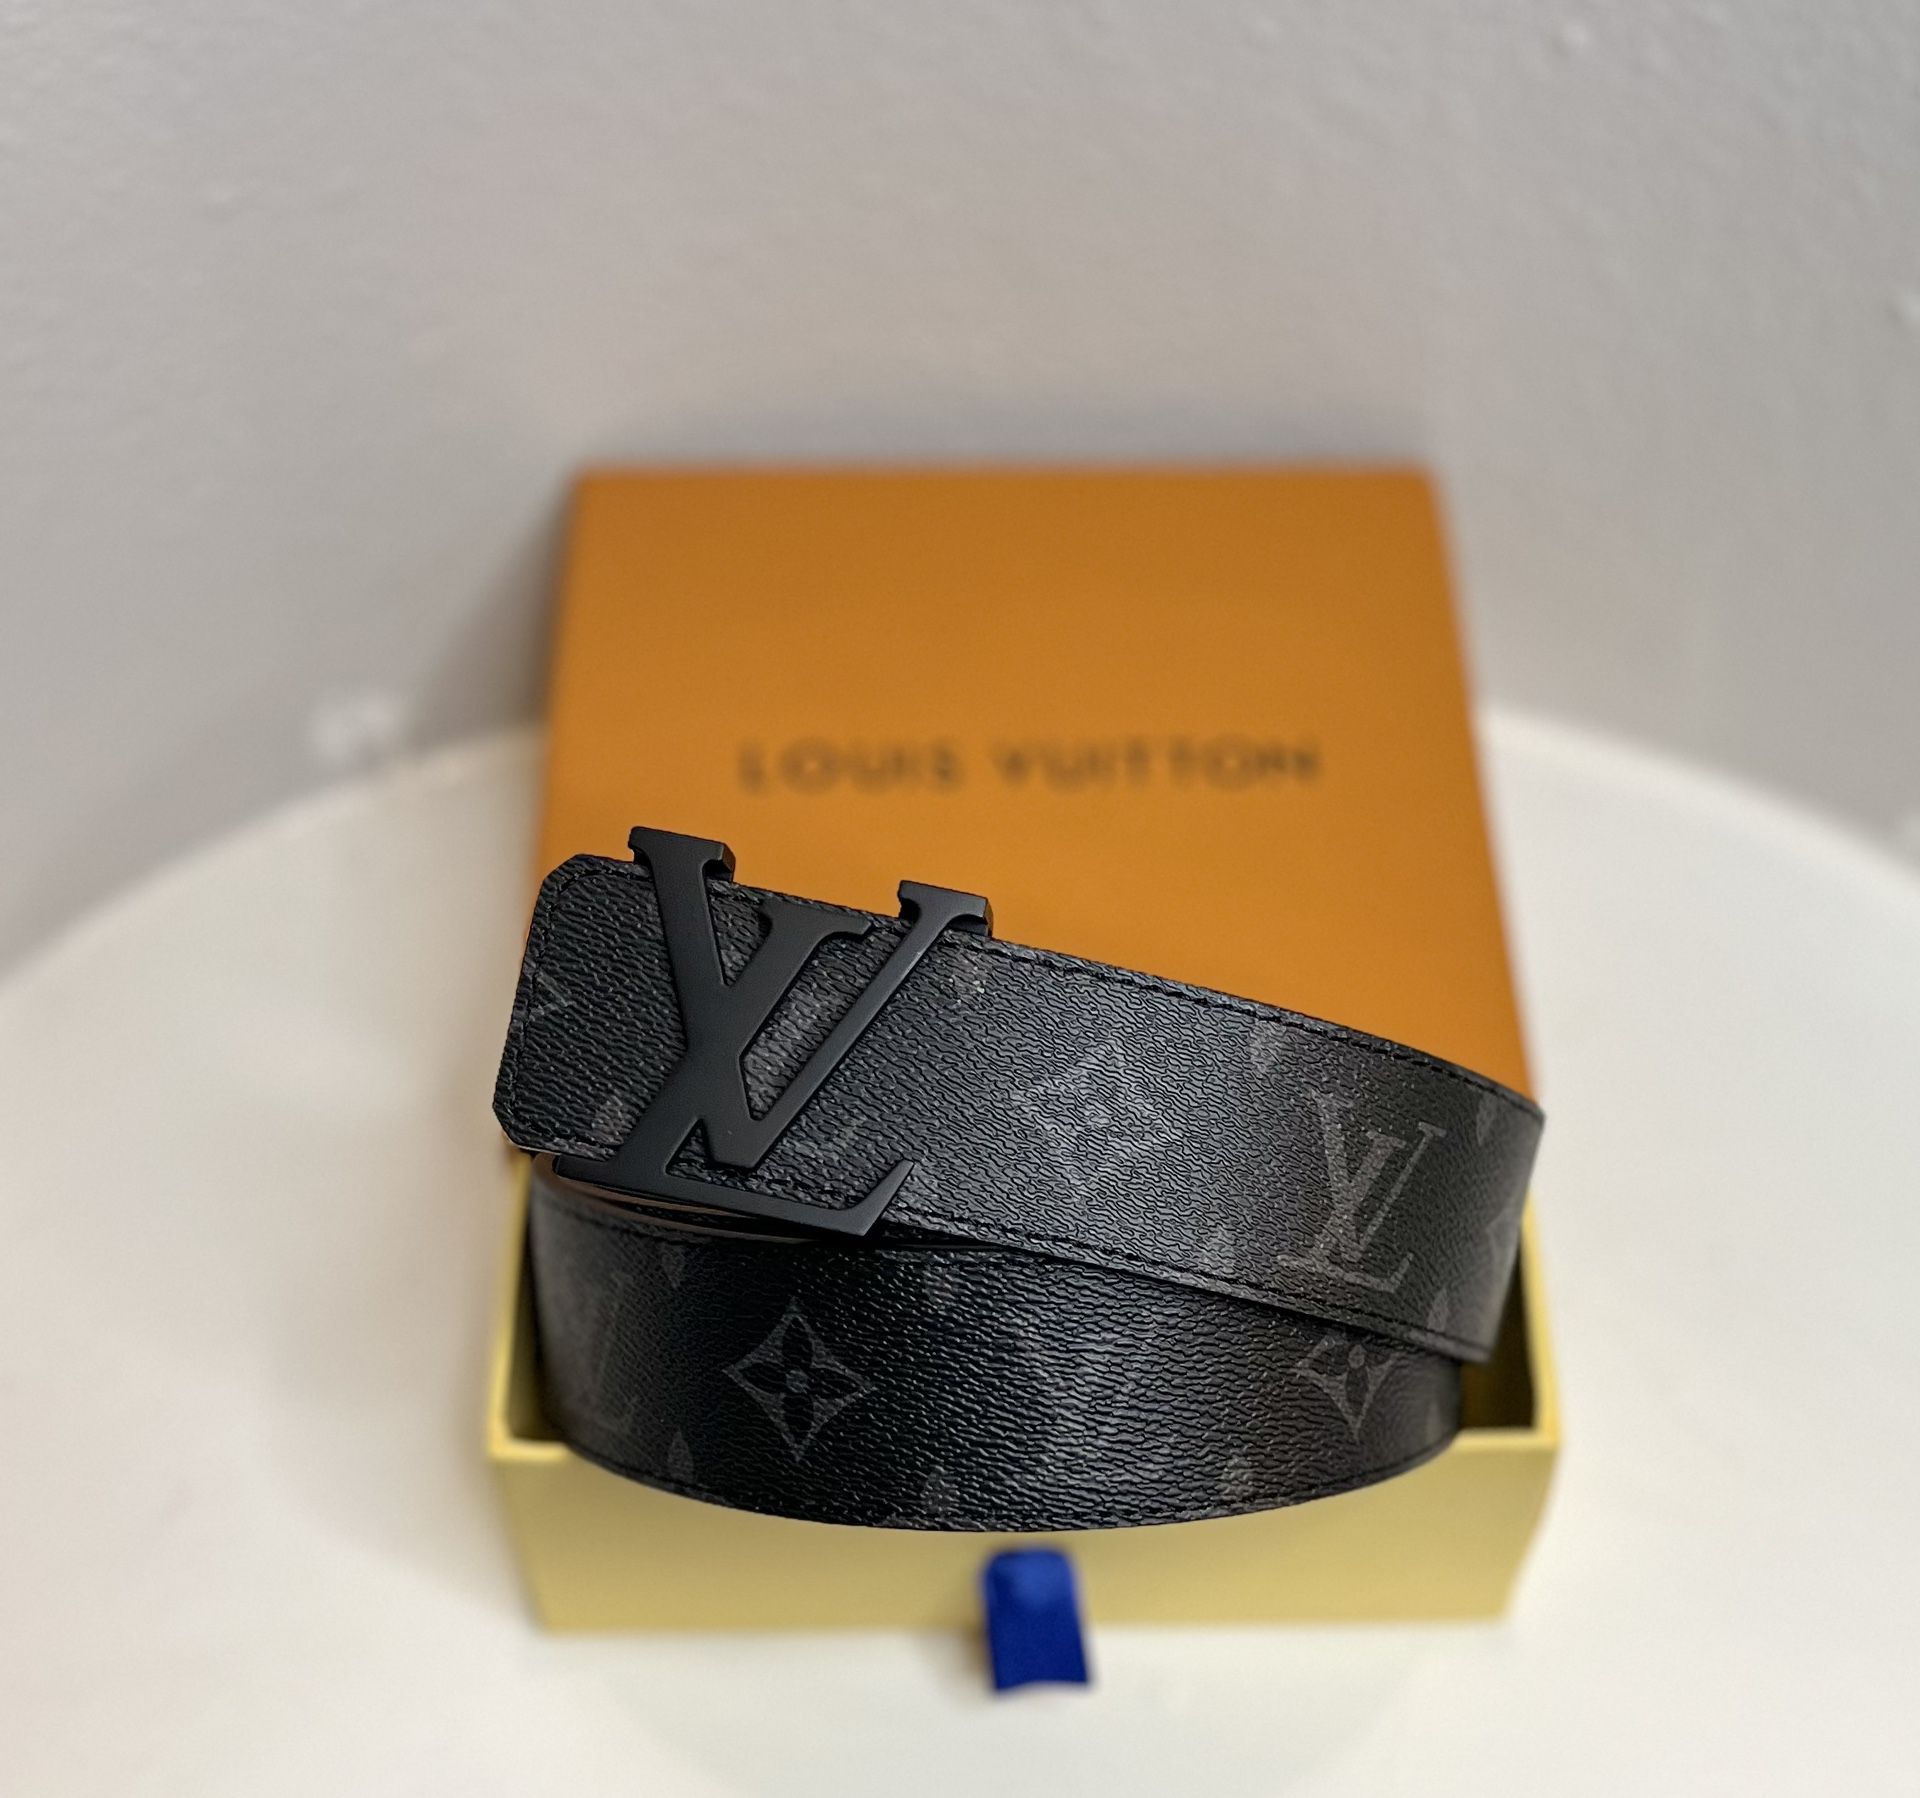 Louis Vuitton Belt Brand New With Box And Dust Bag